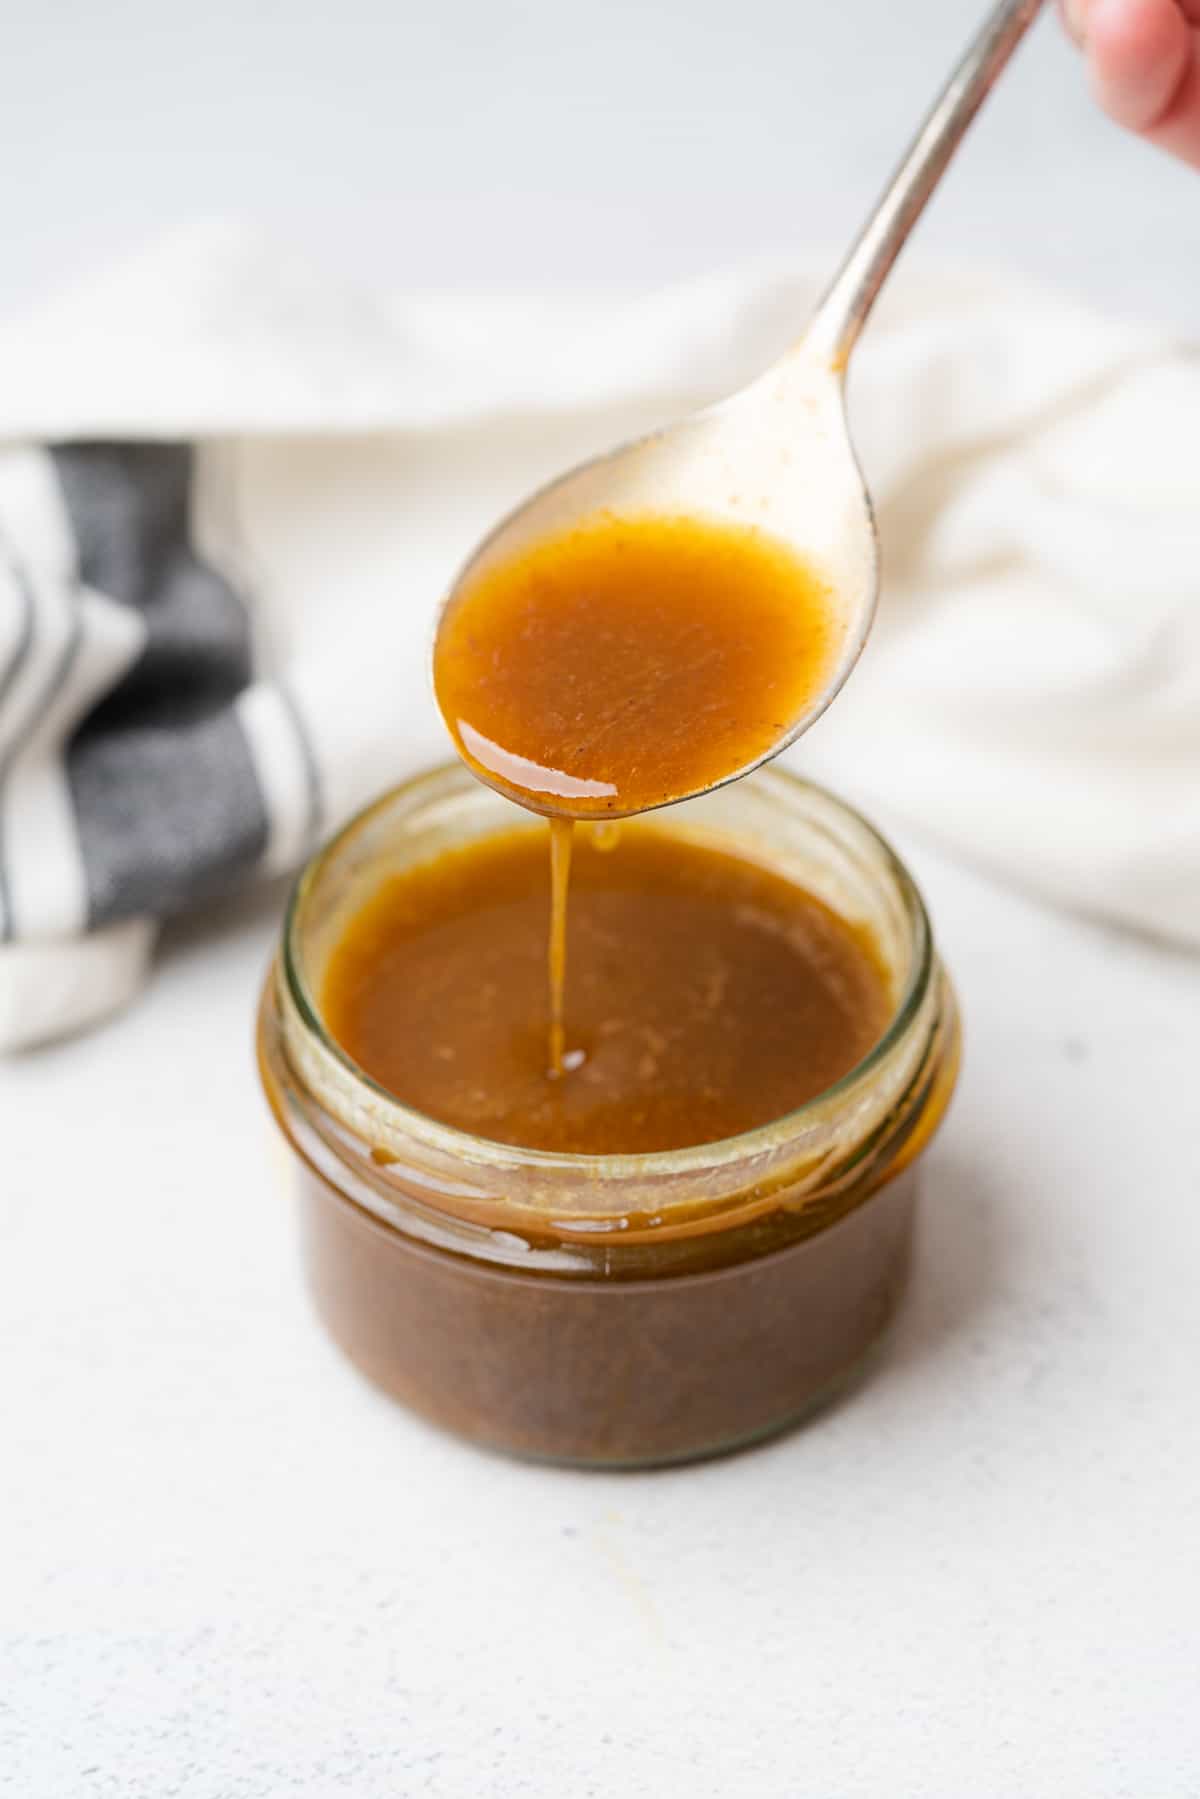 spoonful of homemade creamy balsamic dressing dripping off of a spoon into a jar